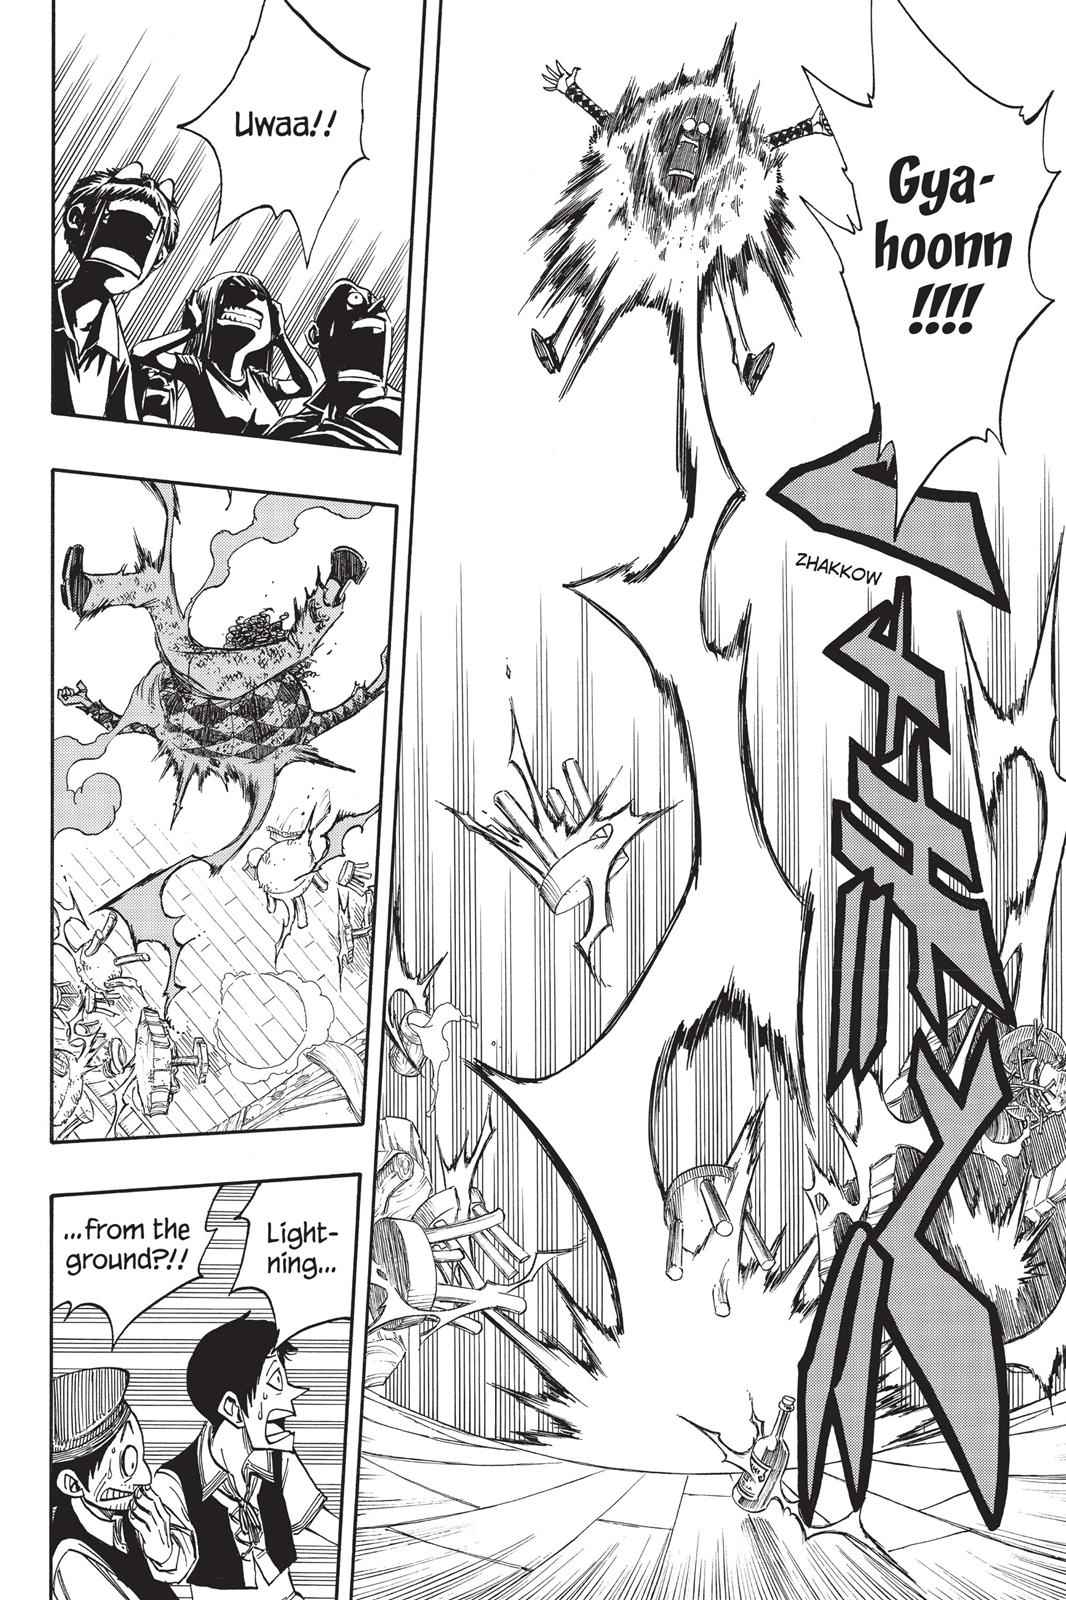  Chapter 105 image 008